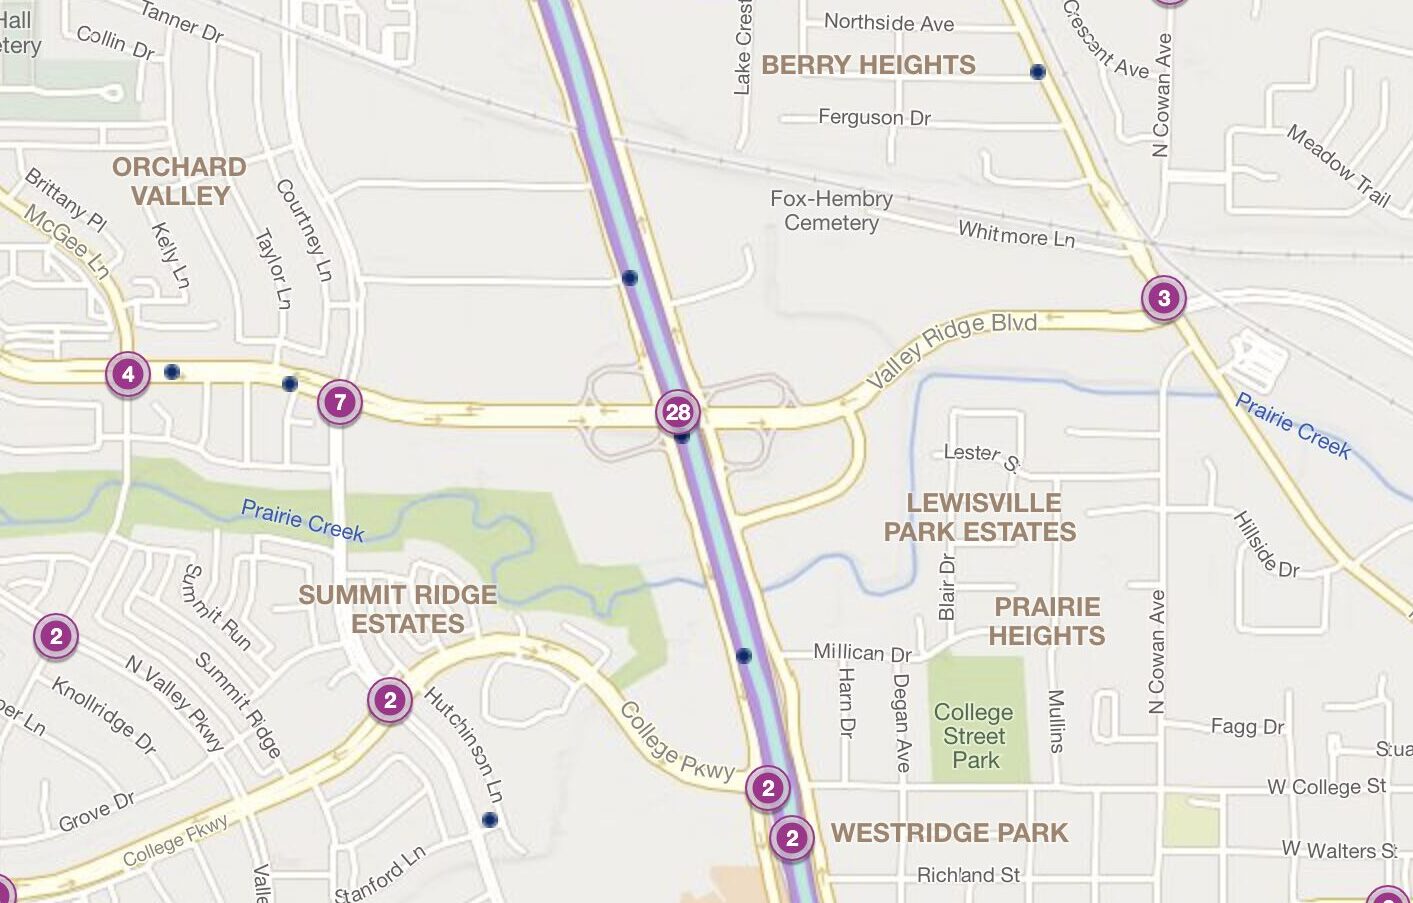 Cluster Map of 2023 Car Accidents at I-35E & Valley Ridge Blvd. (TXDOT)